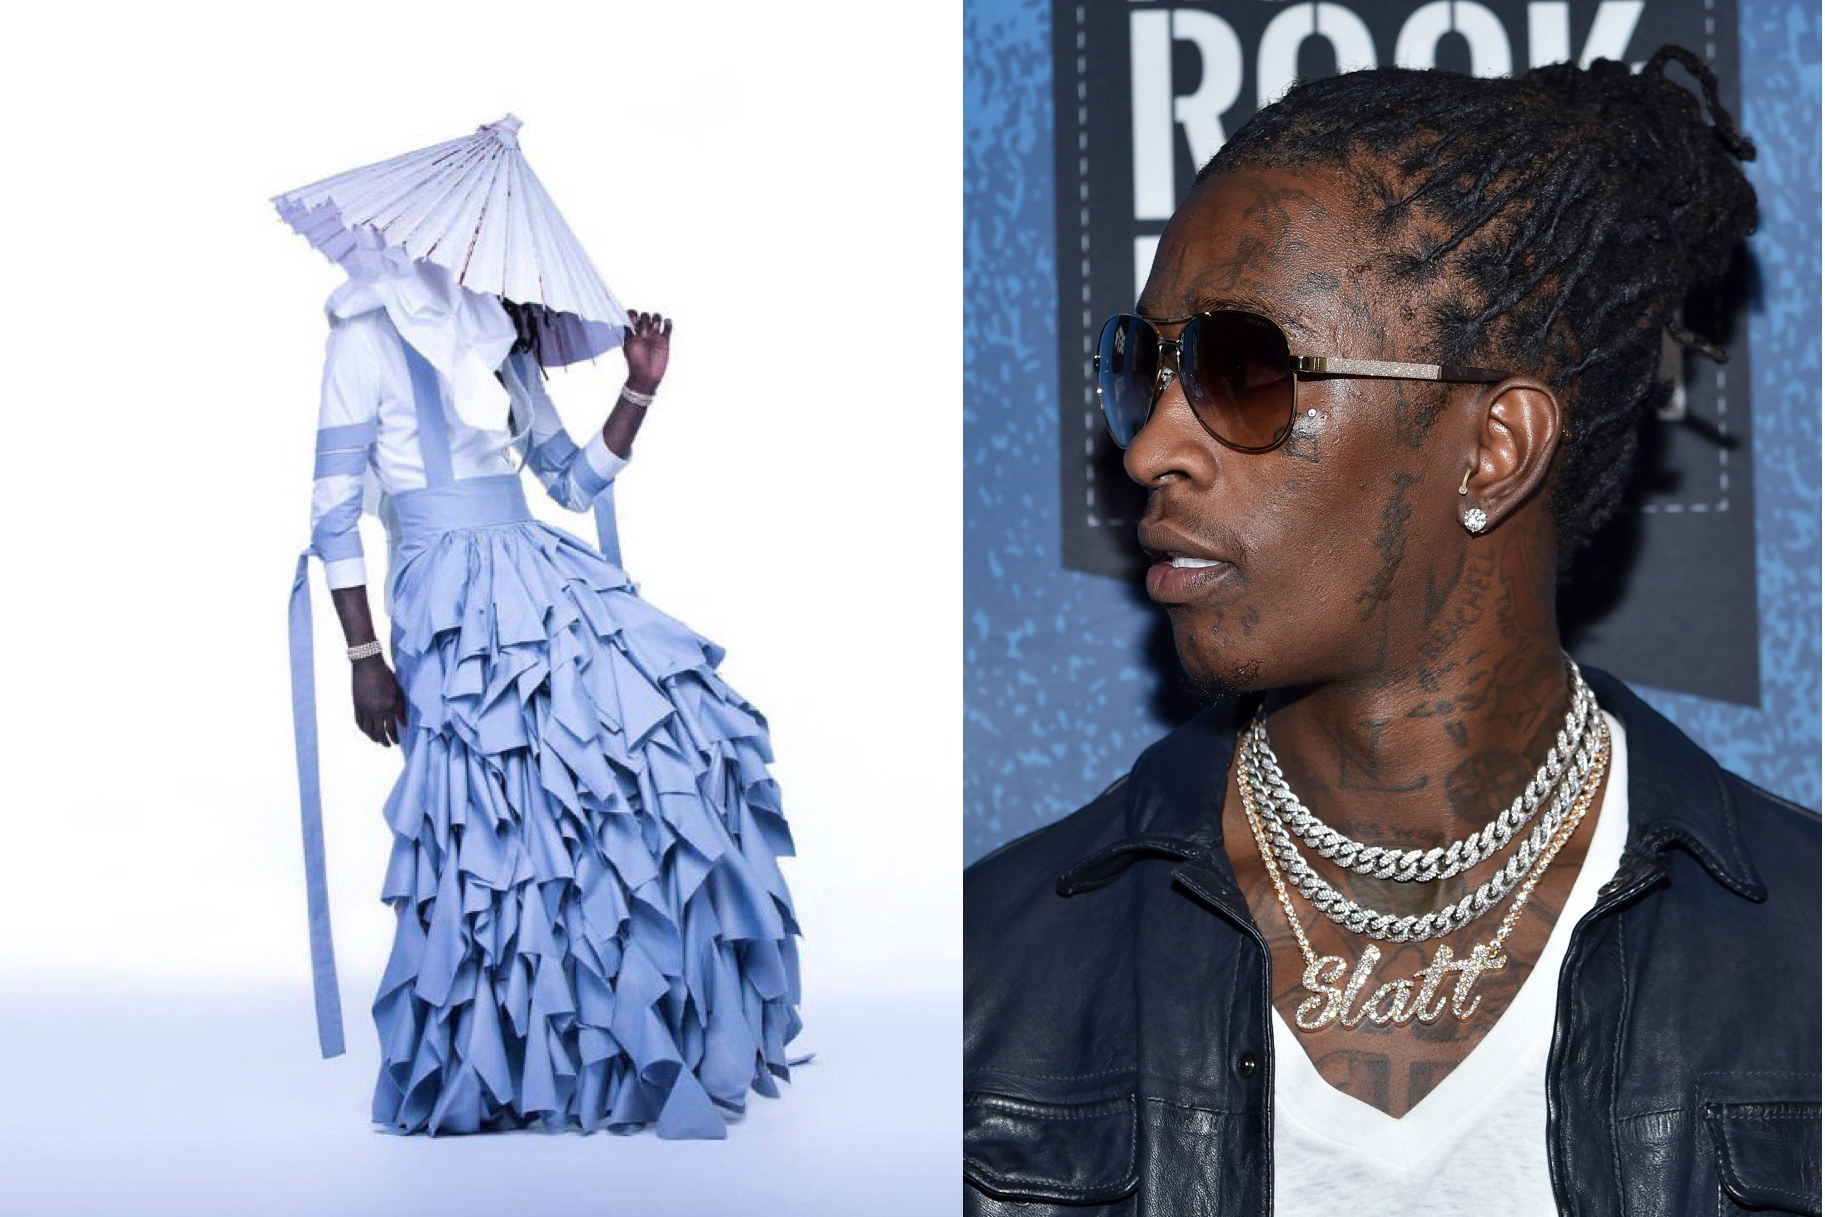 Young Thug's In A Dress For His Album Cover, And Everyone Has An Opinion | Very Real1825 x 1217